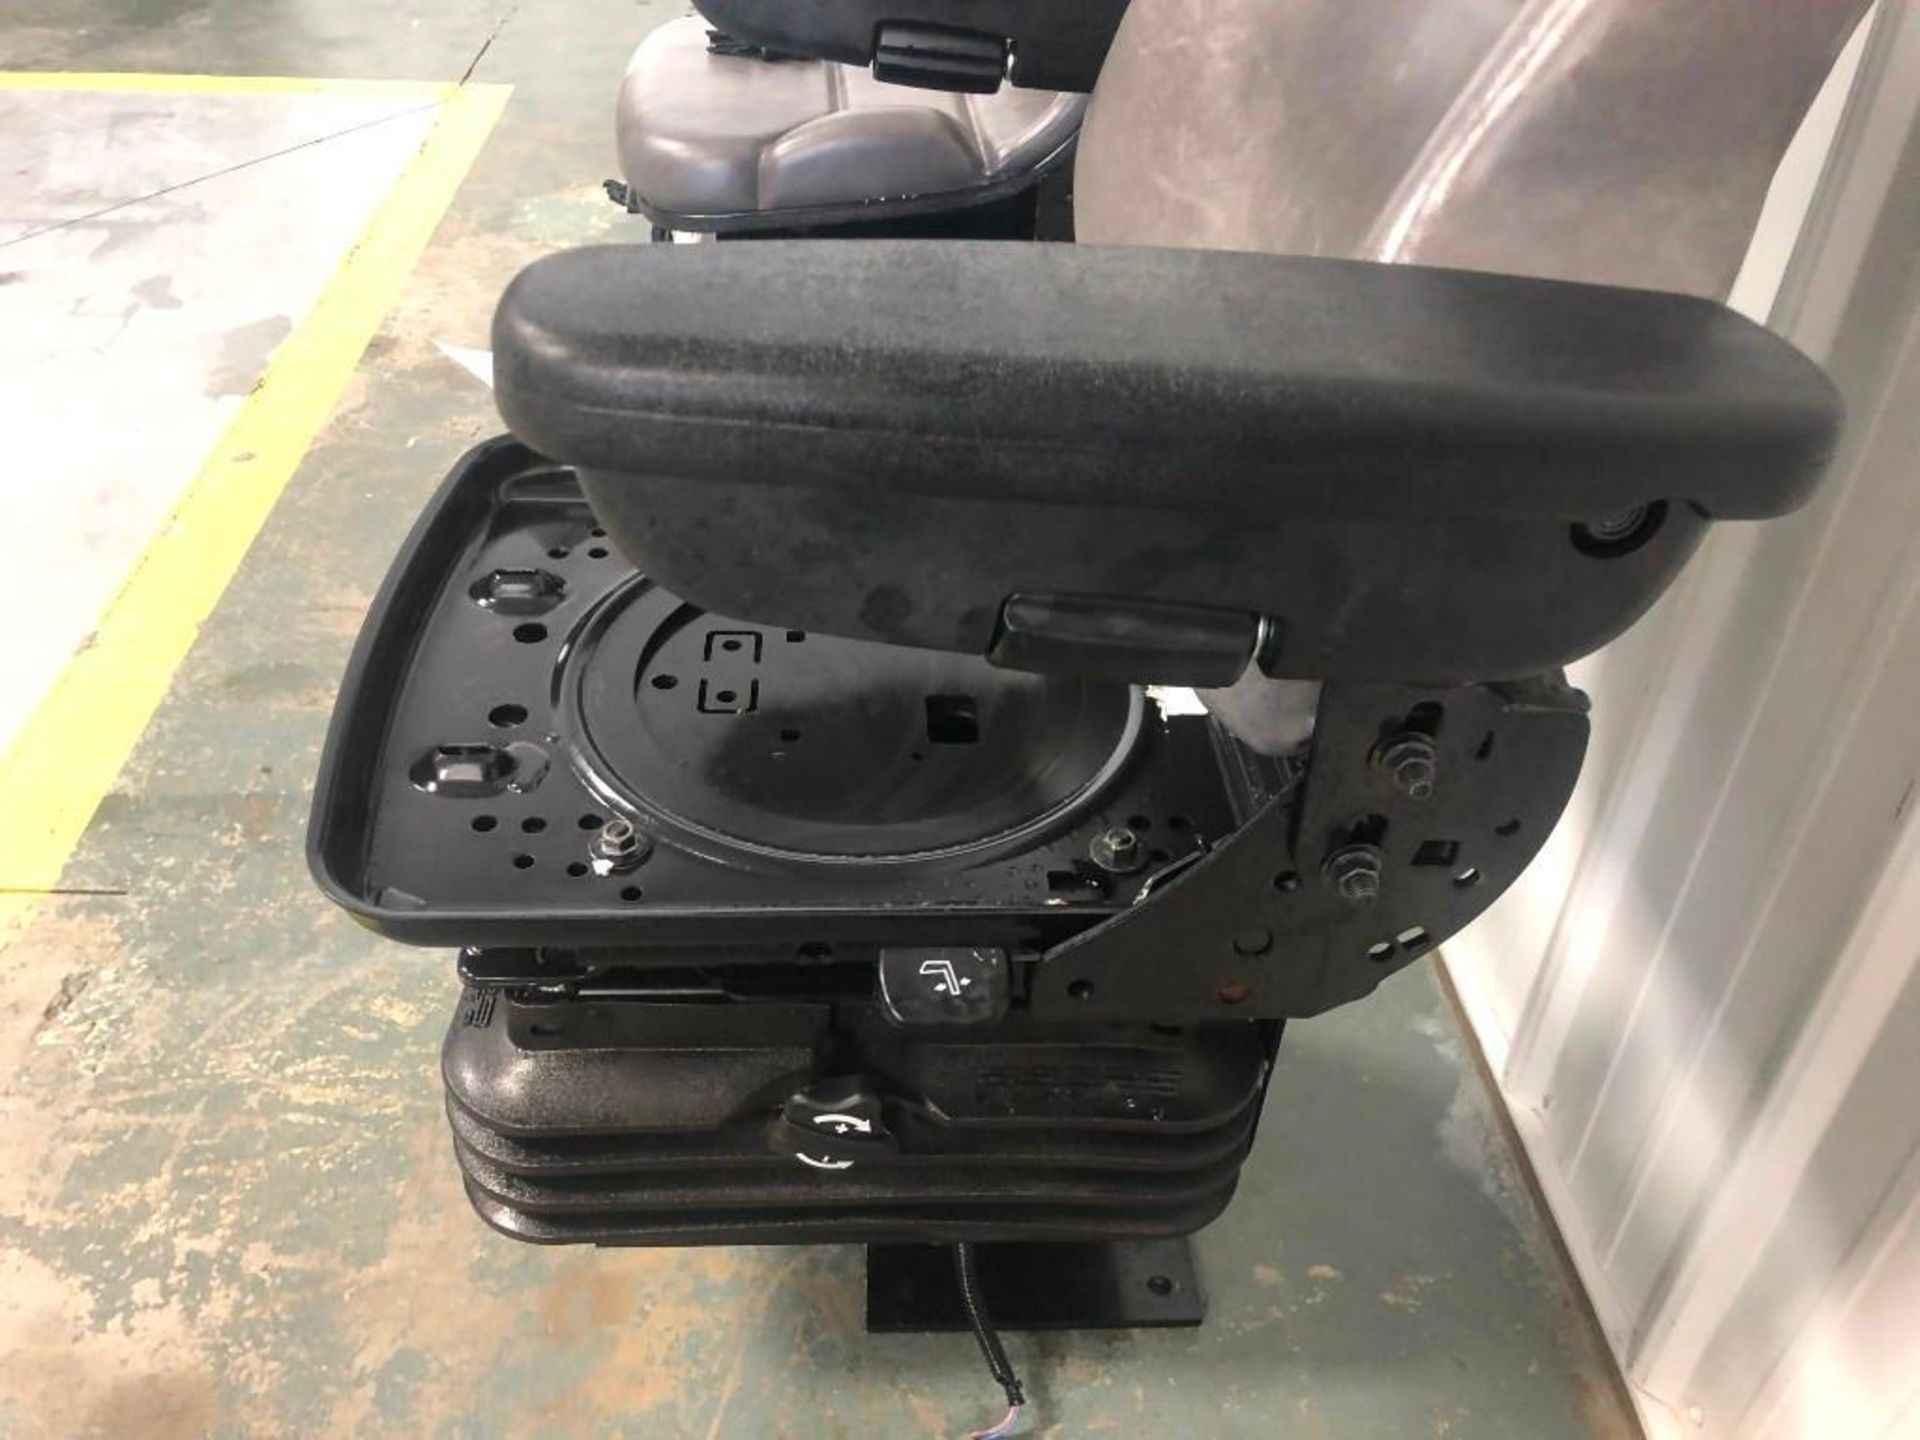 Case Backhoe Air-Ride Seat. Located at 301 E Henry Street, Mt. Pleasant, IA 52641. - Image 2 of 4